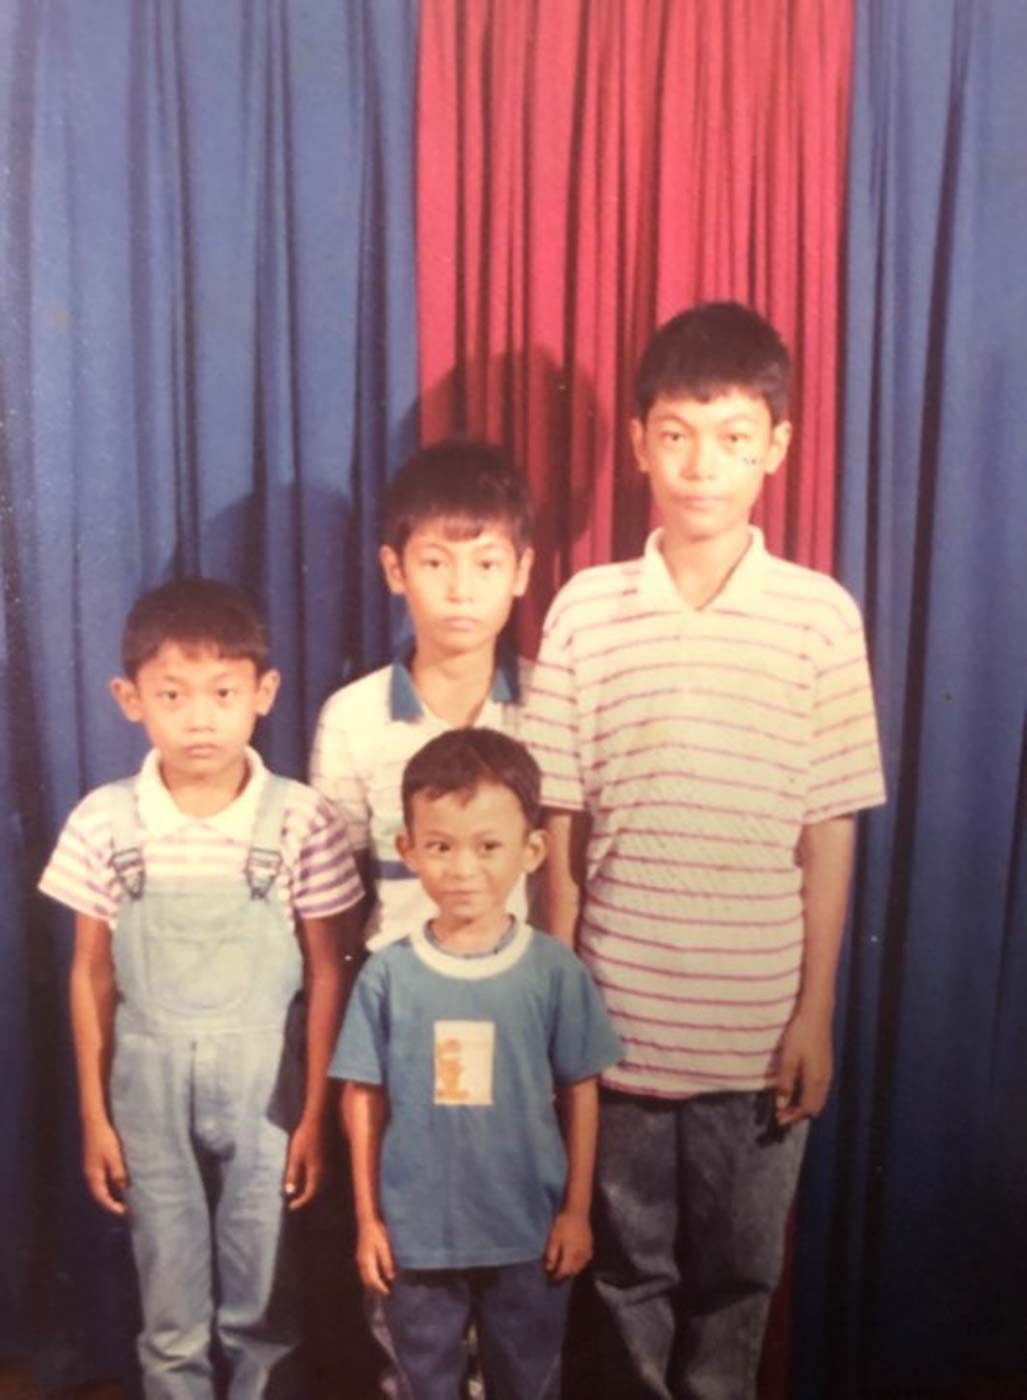 THE YOUNGER YEARS. The three brothers standing at the back Mark Jefferson, Mark Joseph and Domz who was the tallest at that time being the oldest. In front is their cousin Gilbert.  Photo courtesy of Domz Ramos  